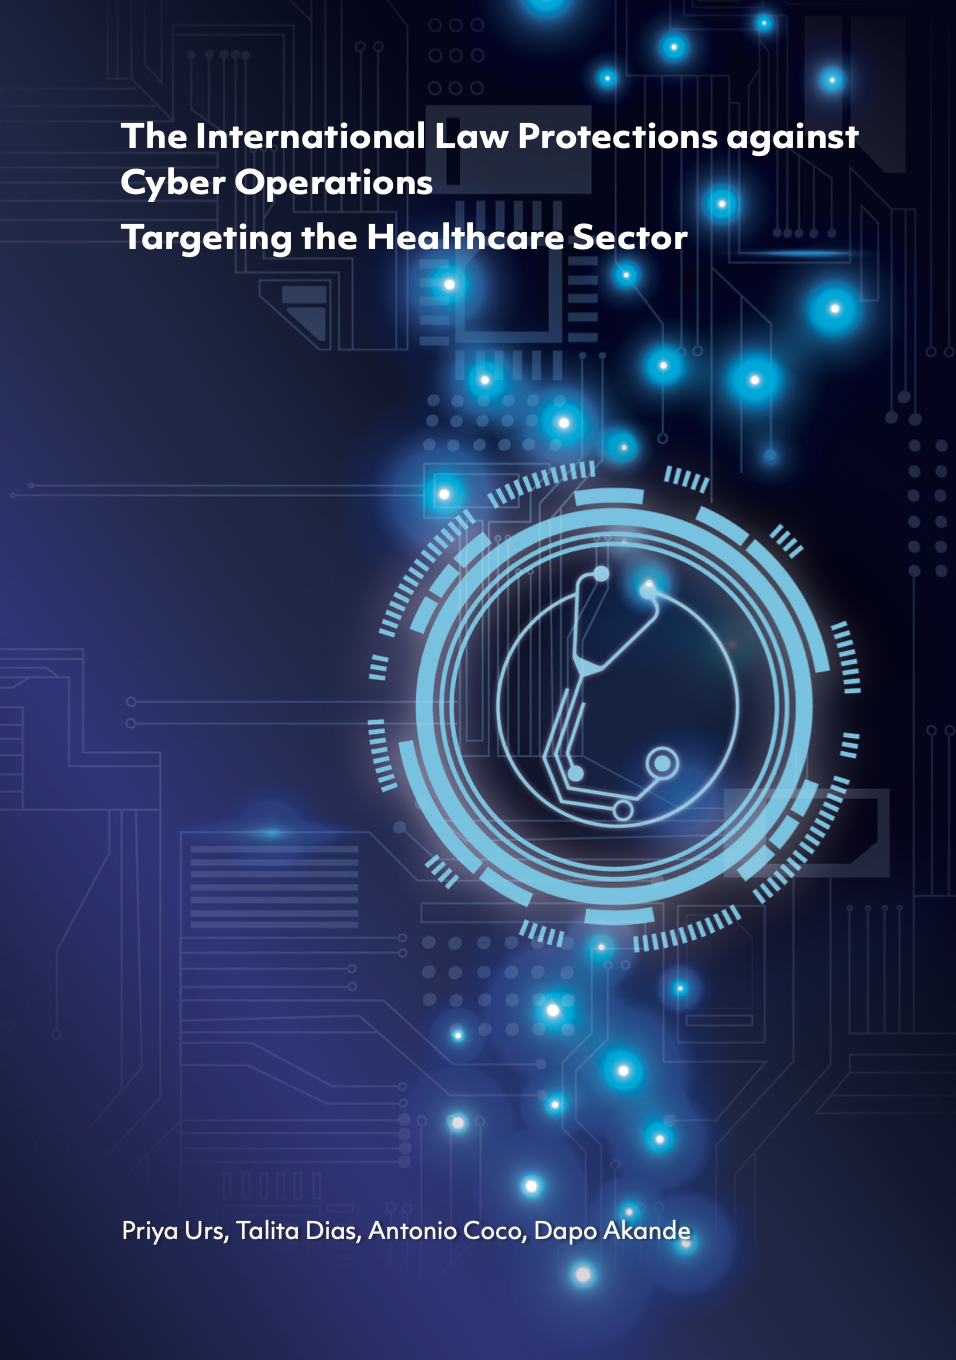 The International Law Protections against Cyber Operations Targeting the Healthcare Sector